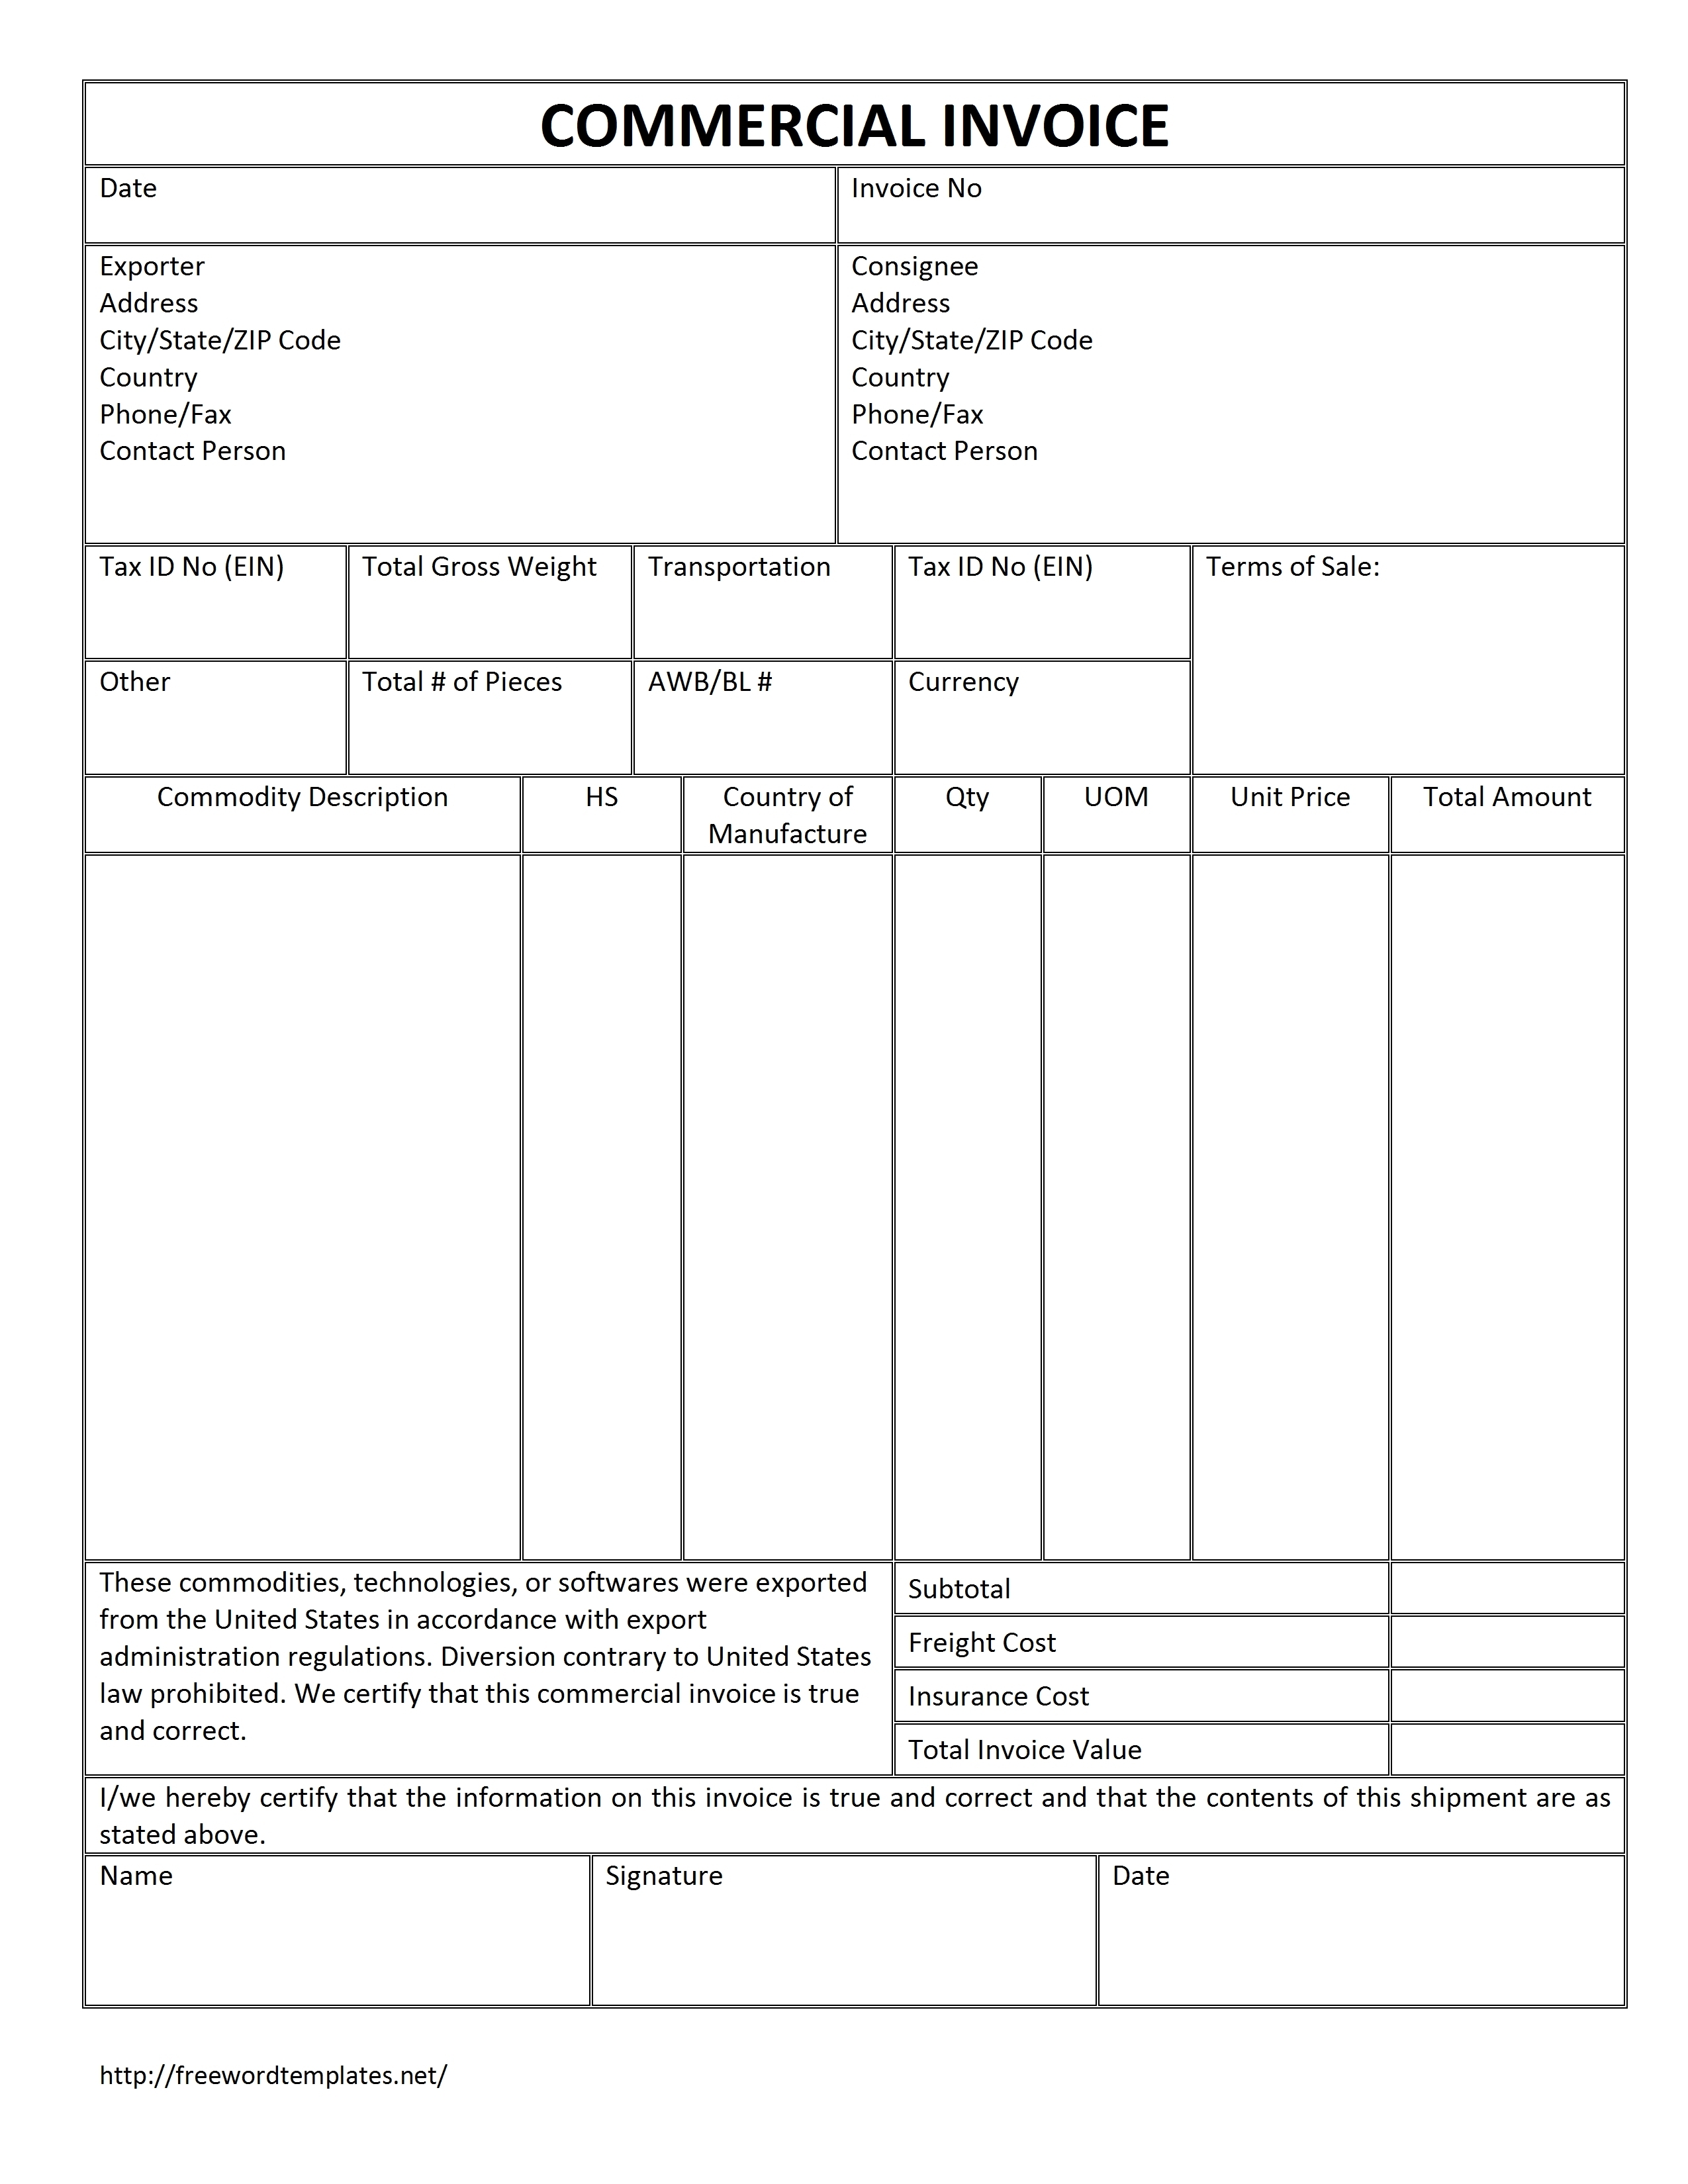 format of commercial invoice invoice template free 2016 international commercial invoice template